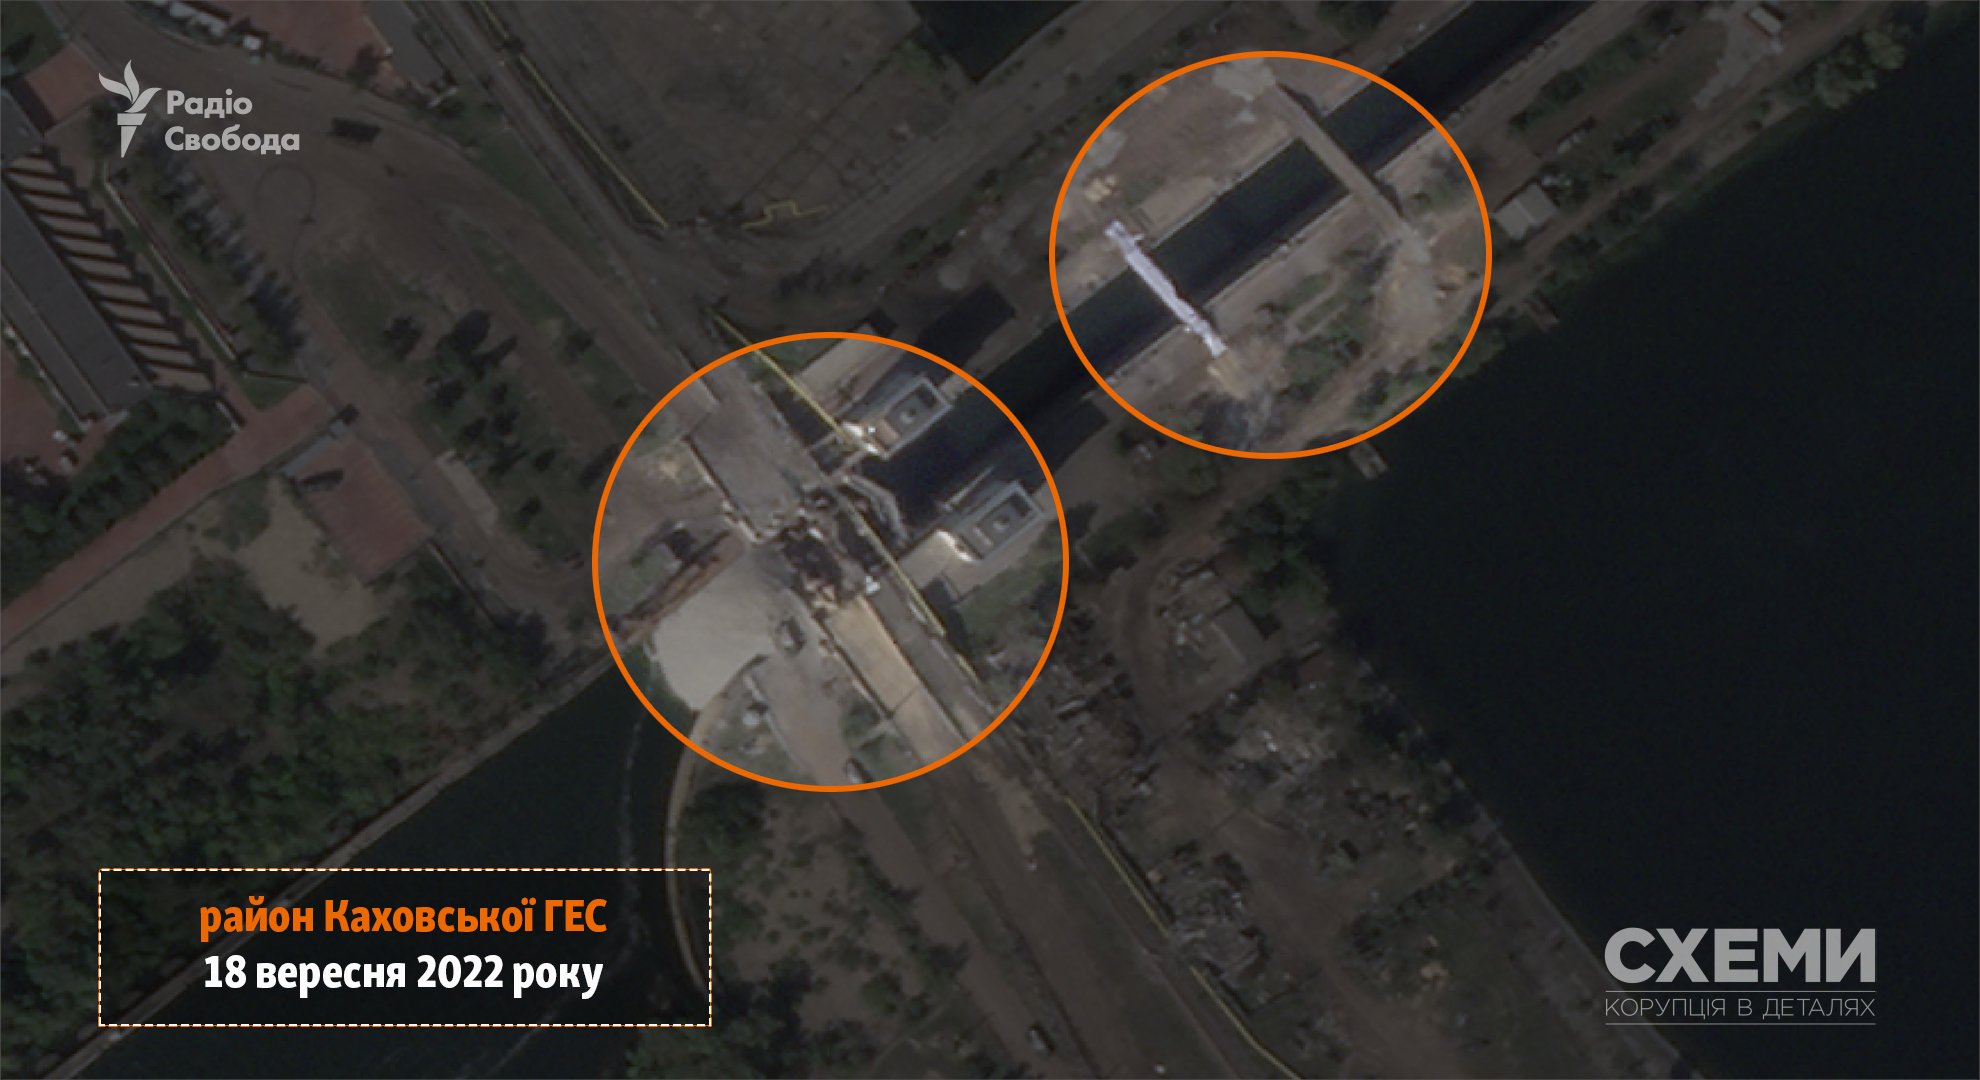 Russian troops trying to restore crossing near Kakhovka power plant, satellite imagery shows